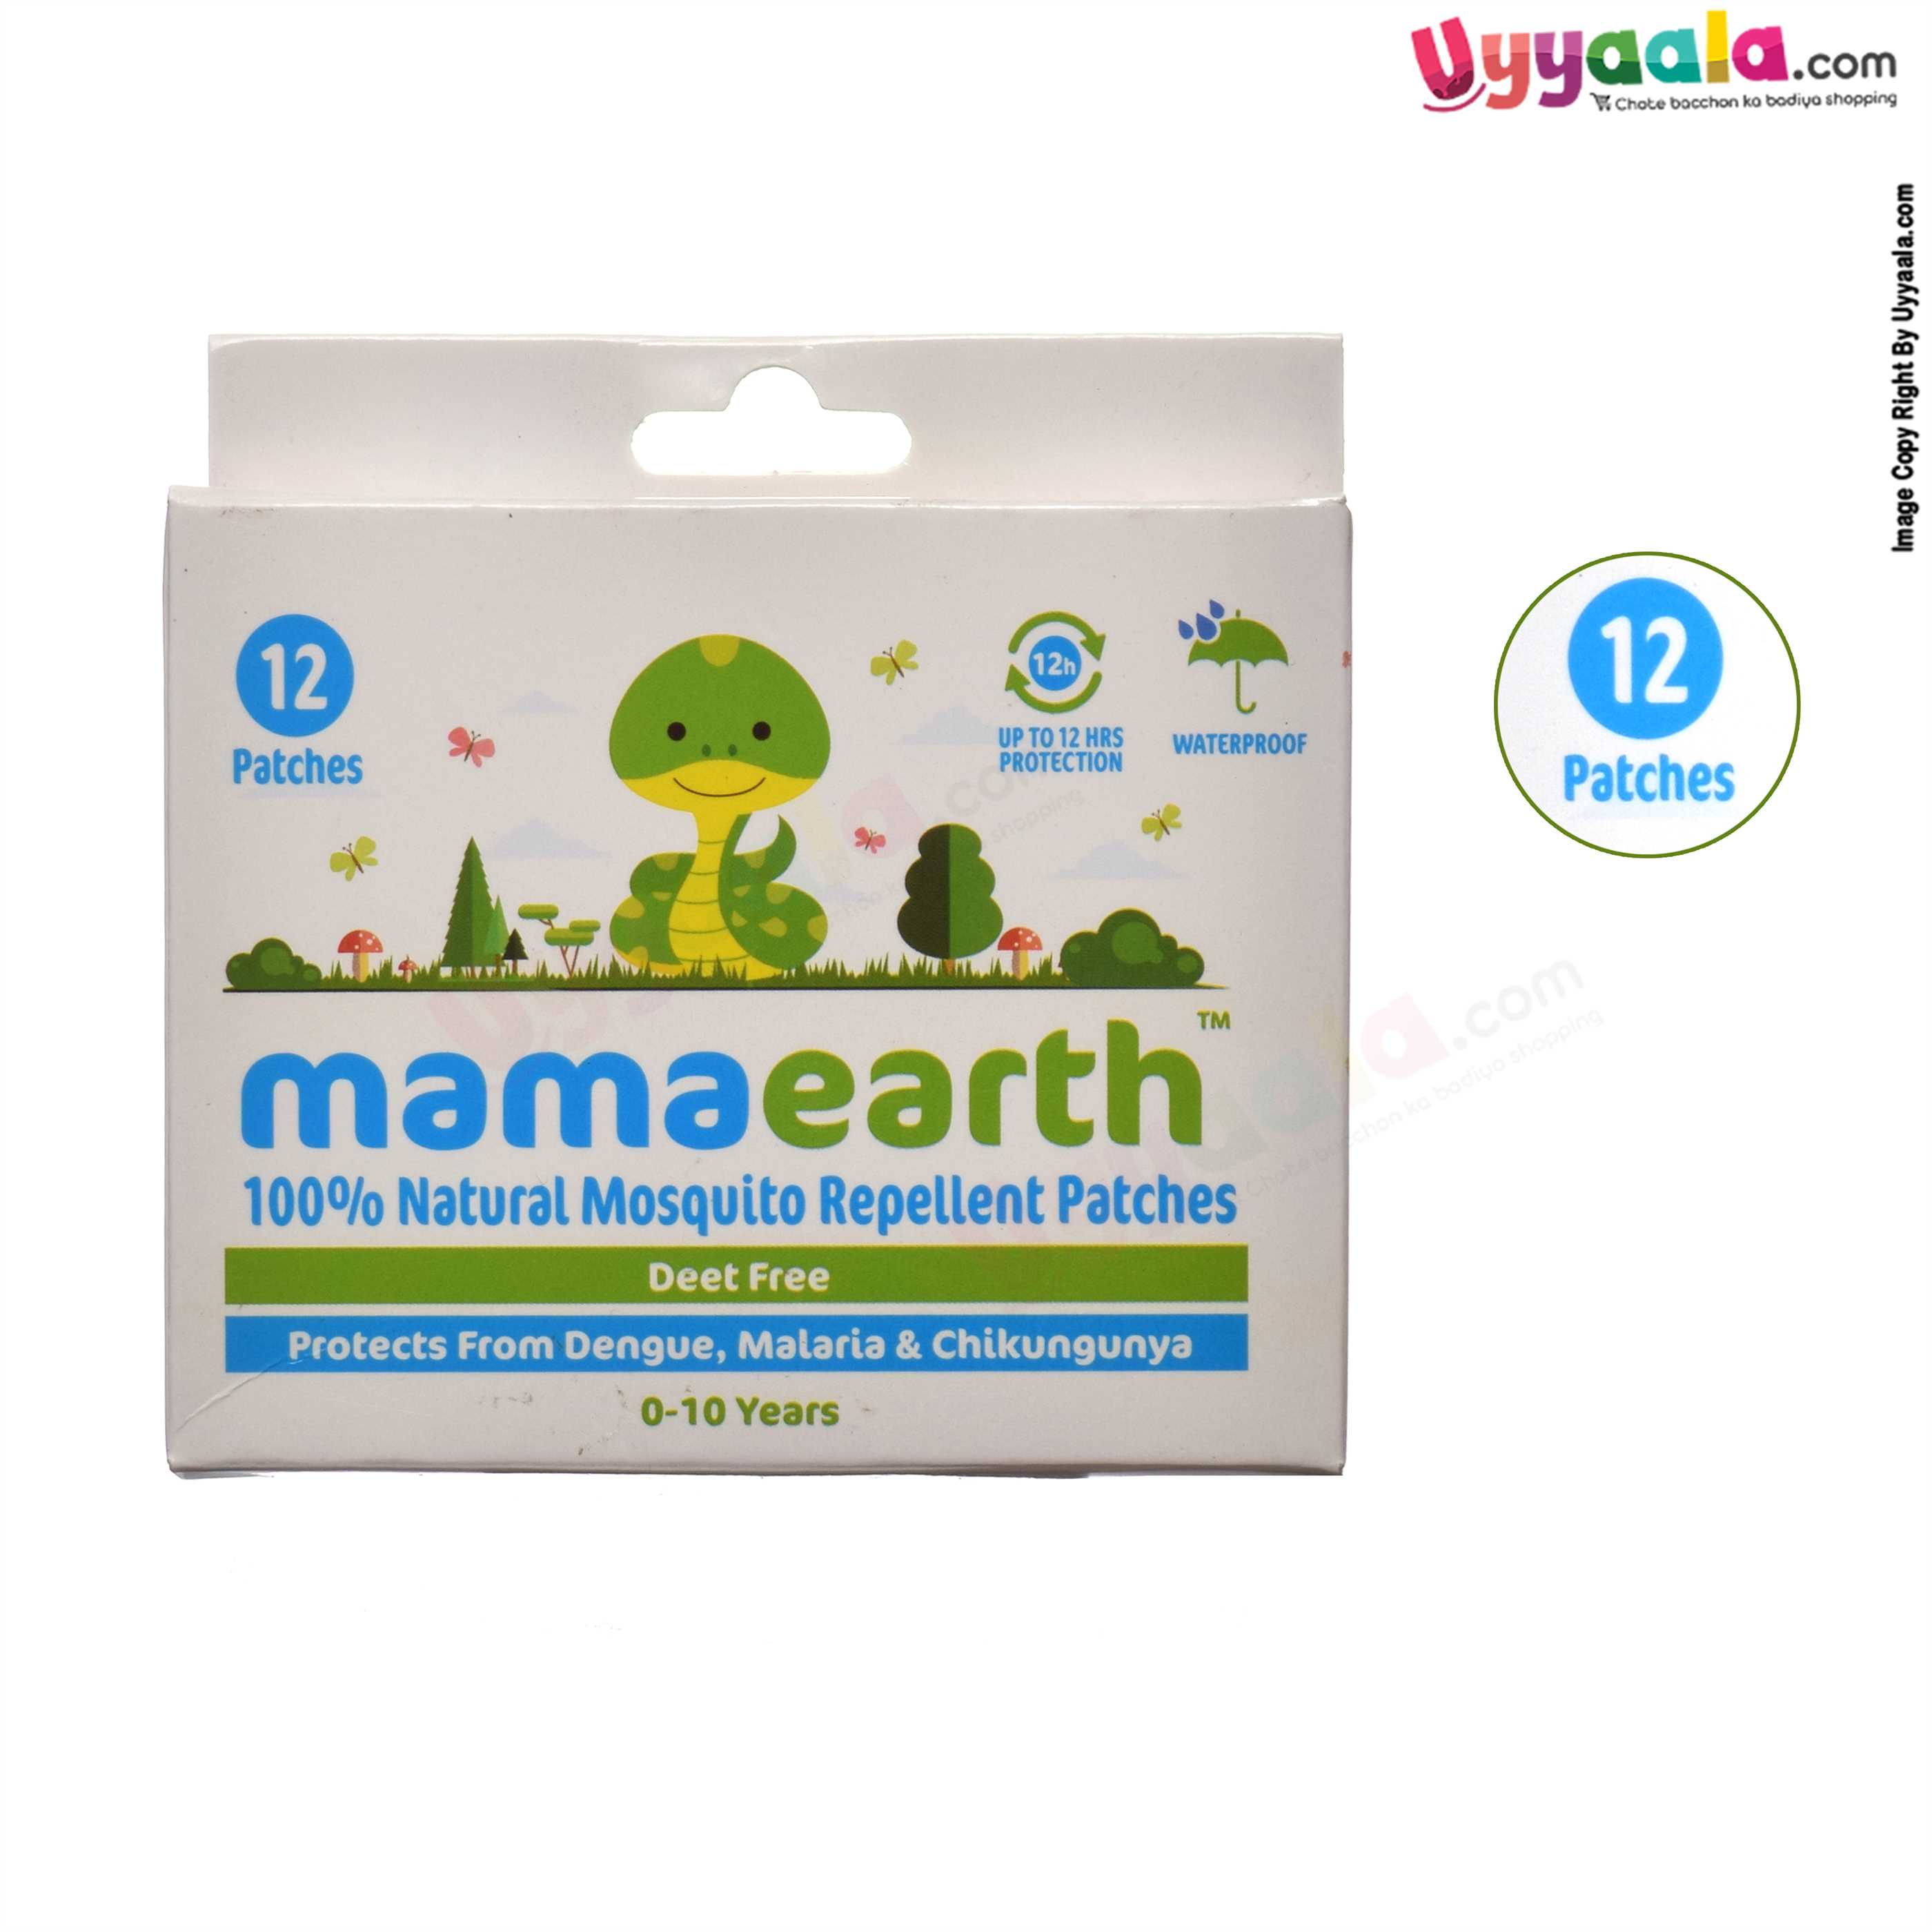 MAMAEARTH 100% Natural mosquito repellent patches